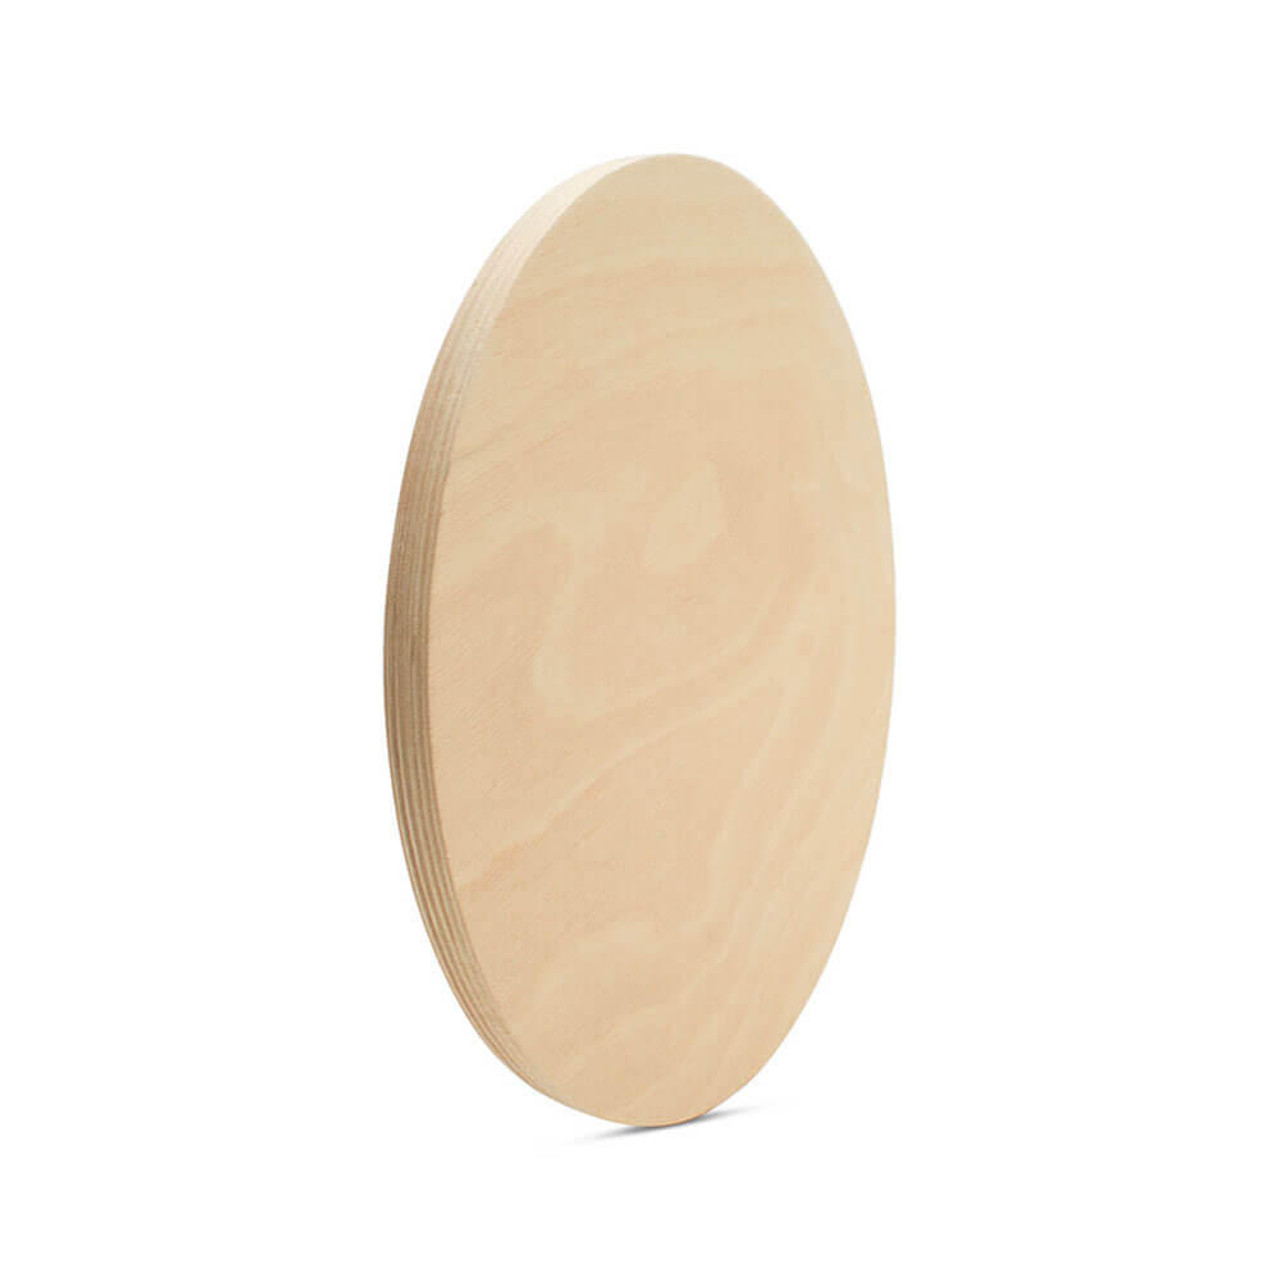 Unfinished Wooden Circle Cutout 12 x 1/2 Thick